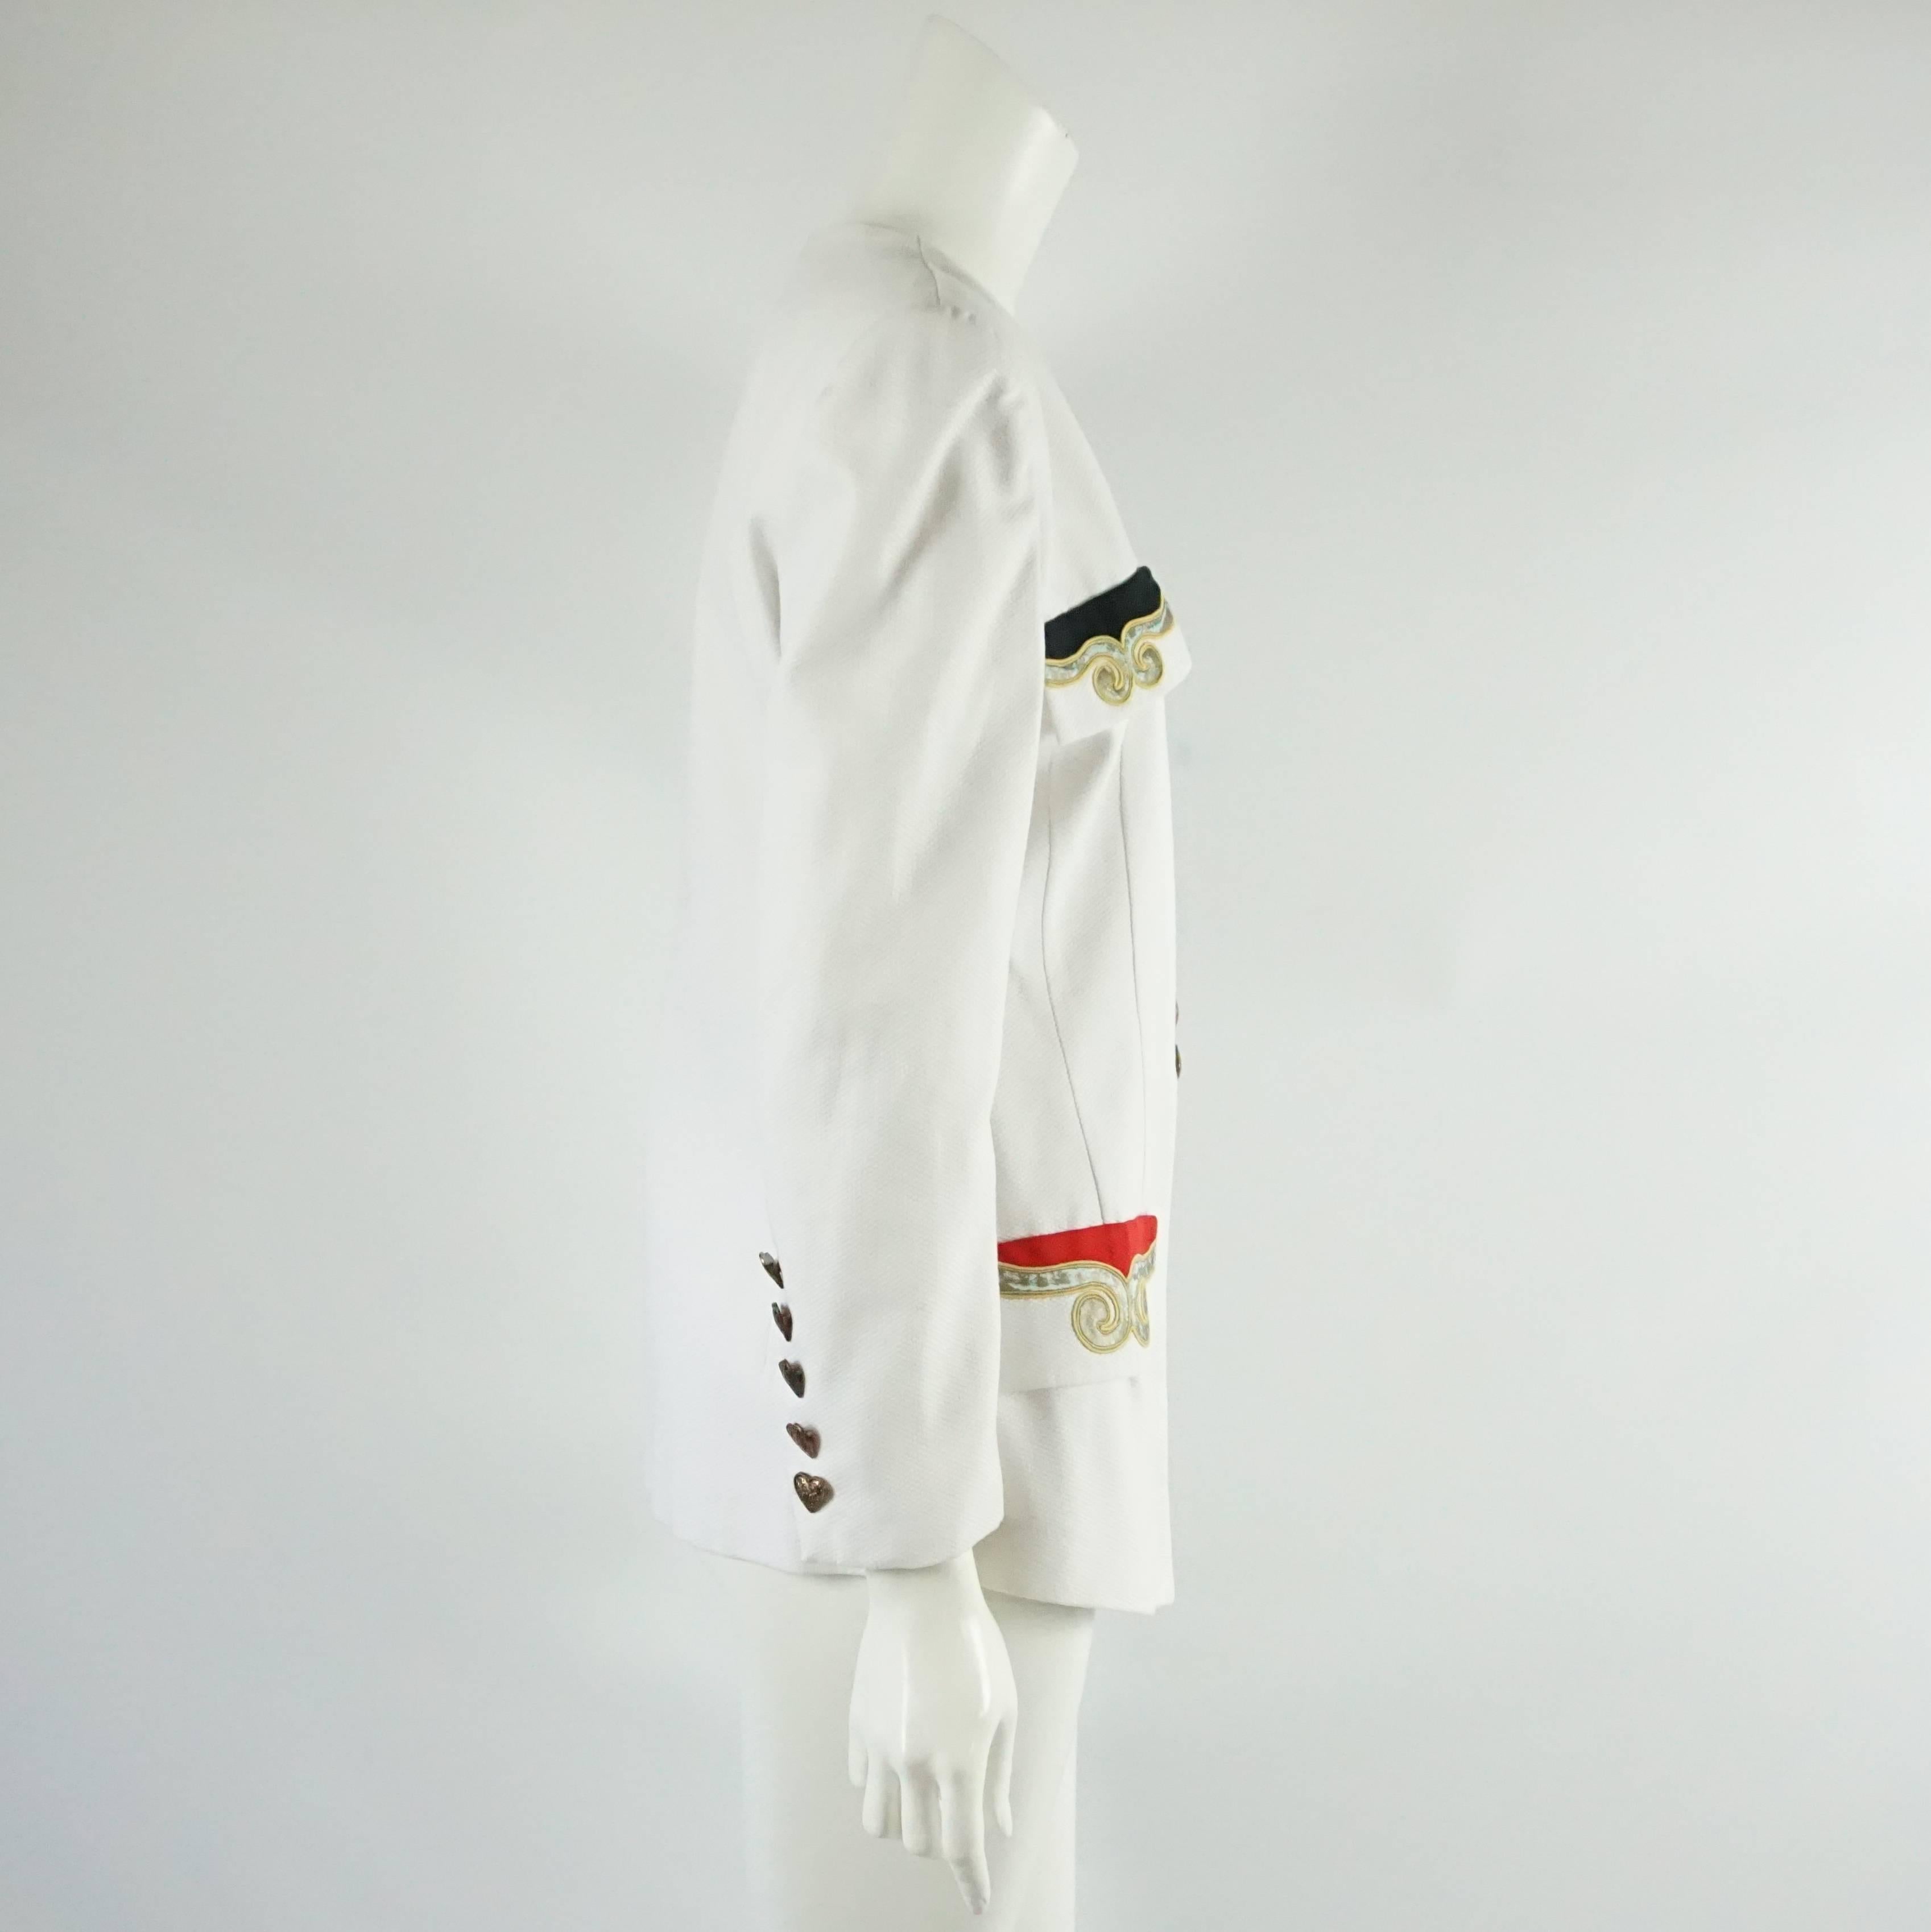 This 1990's Pierre Balmain white jacket has 4 front pockets. The pockets are embroidered in either red or black with gold. This jacket is in very good vintage condition and has 8 front bronze heart-shaped buttons. The same button are on the sleeves.